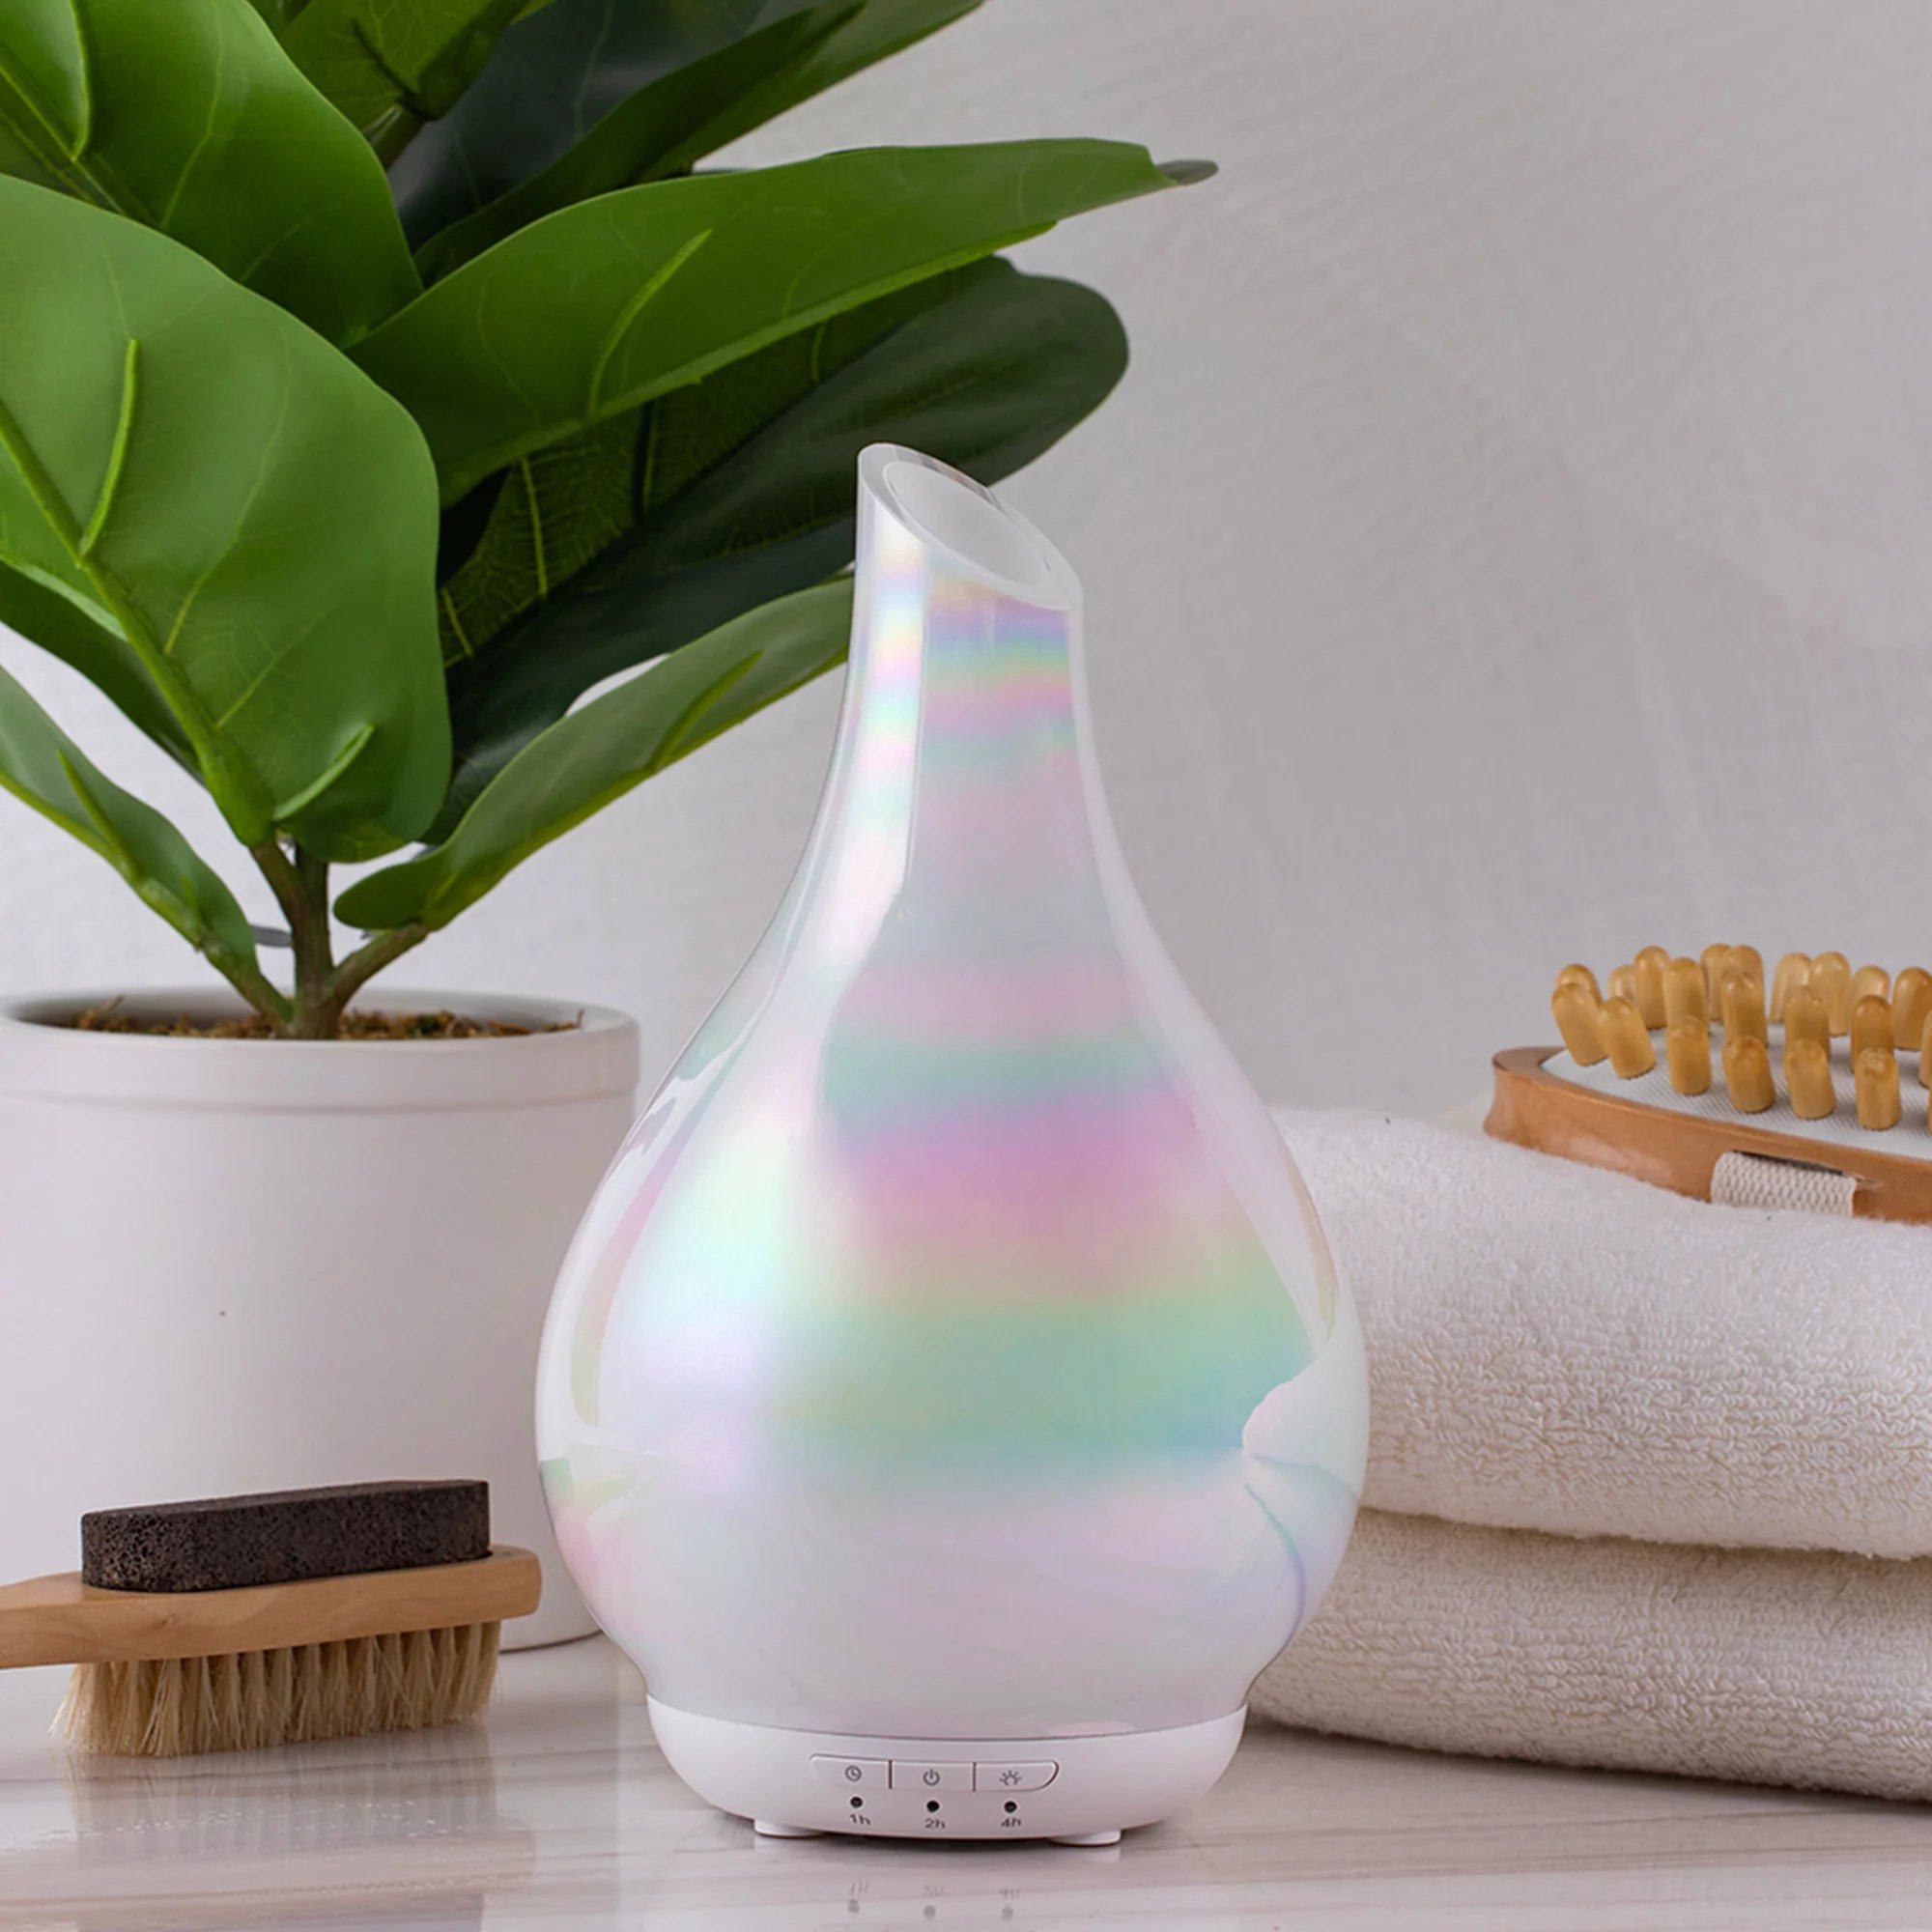 How To Use Bliss Aroma Diffuser